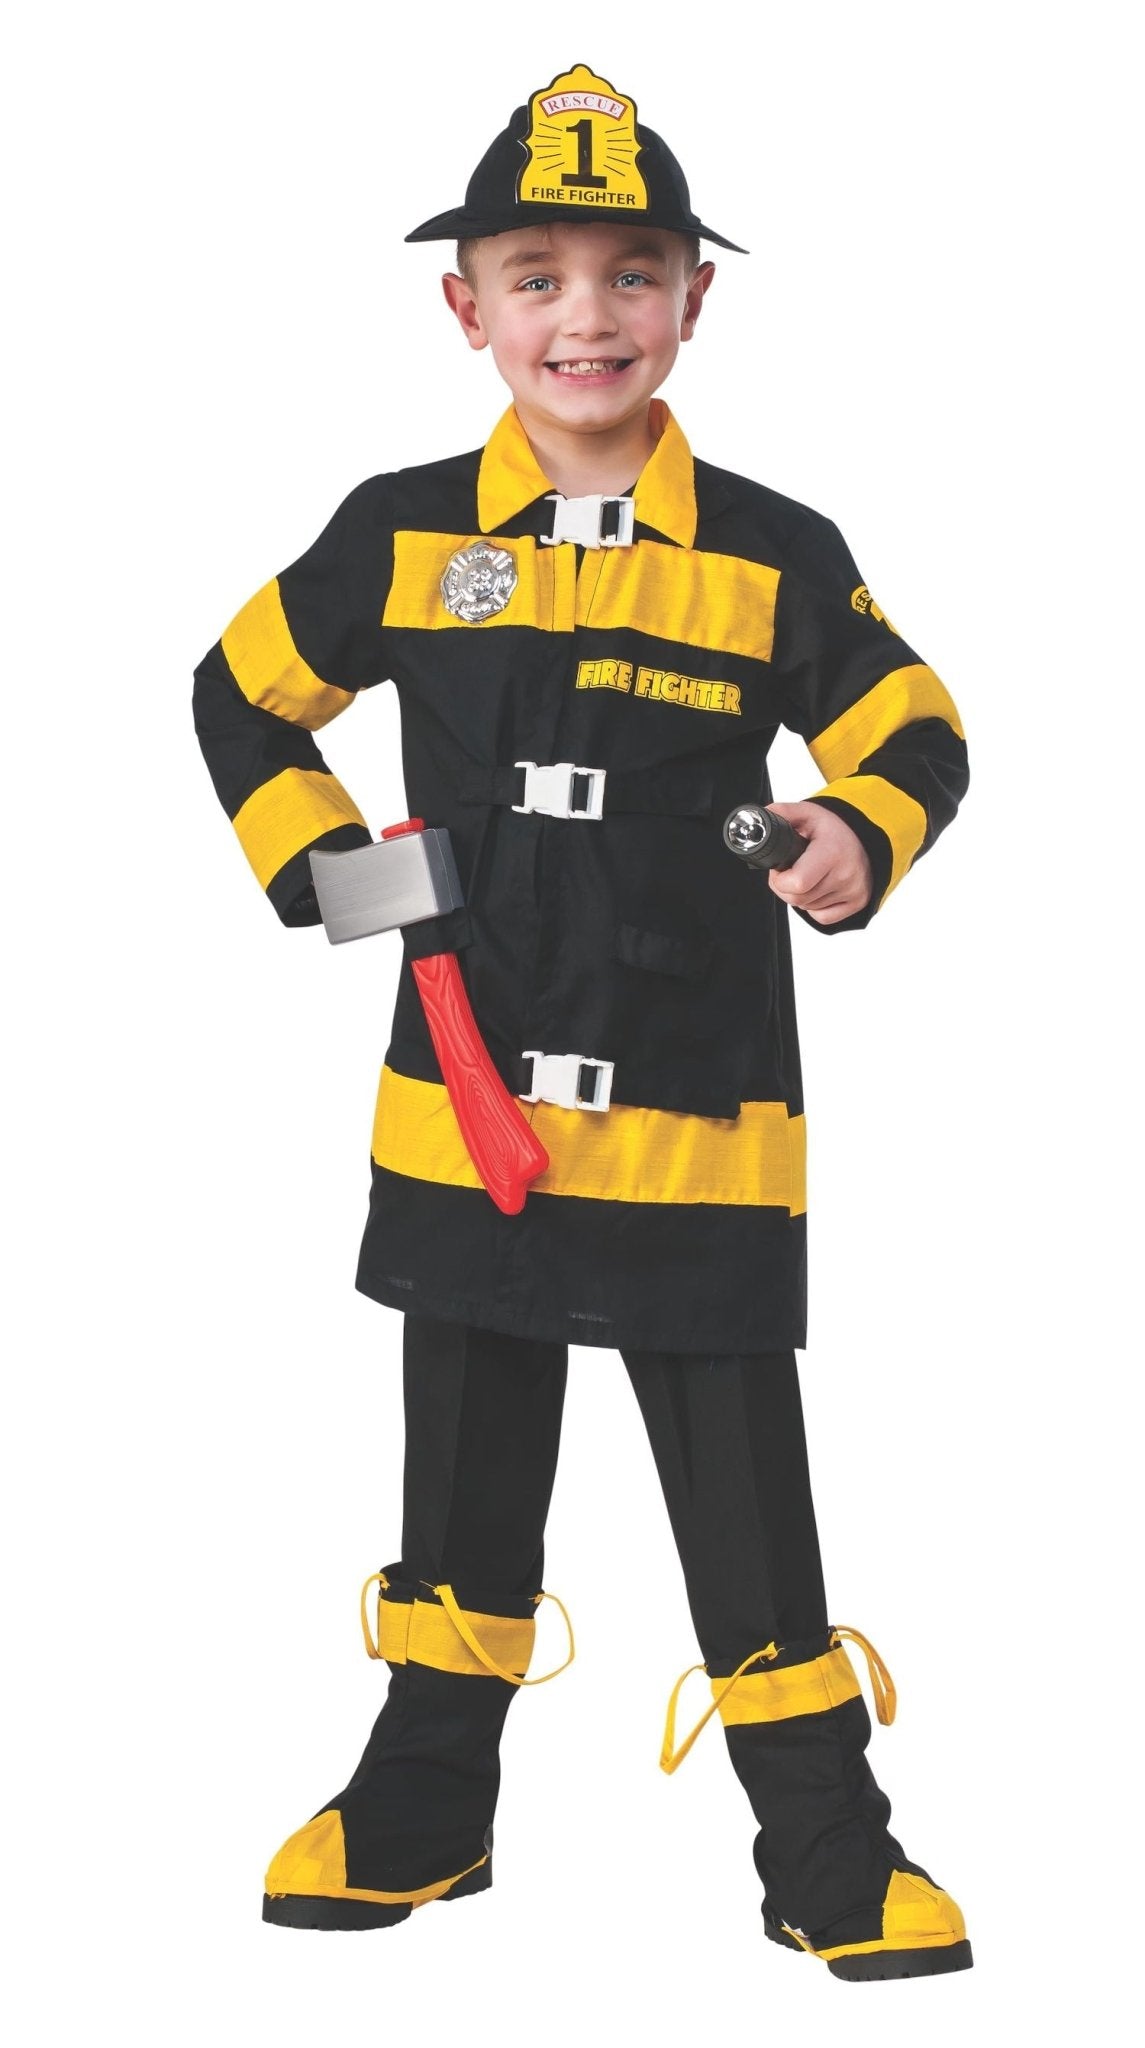 Boys Fire Fighter Costume - JJ's Party House